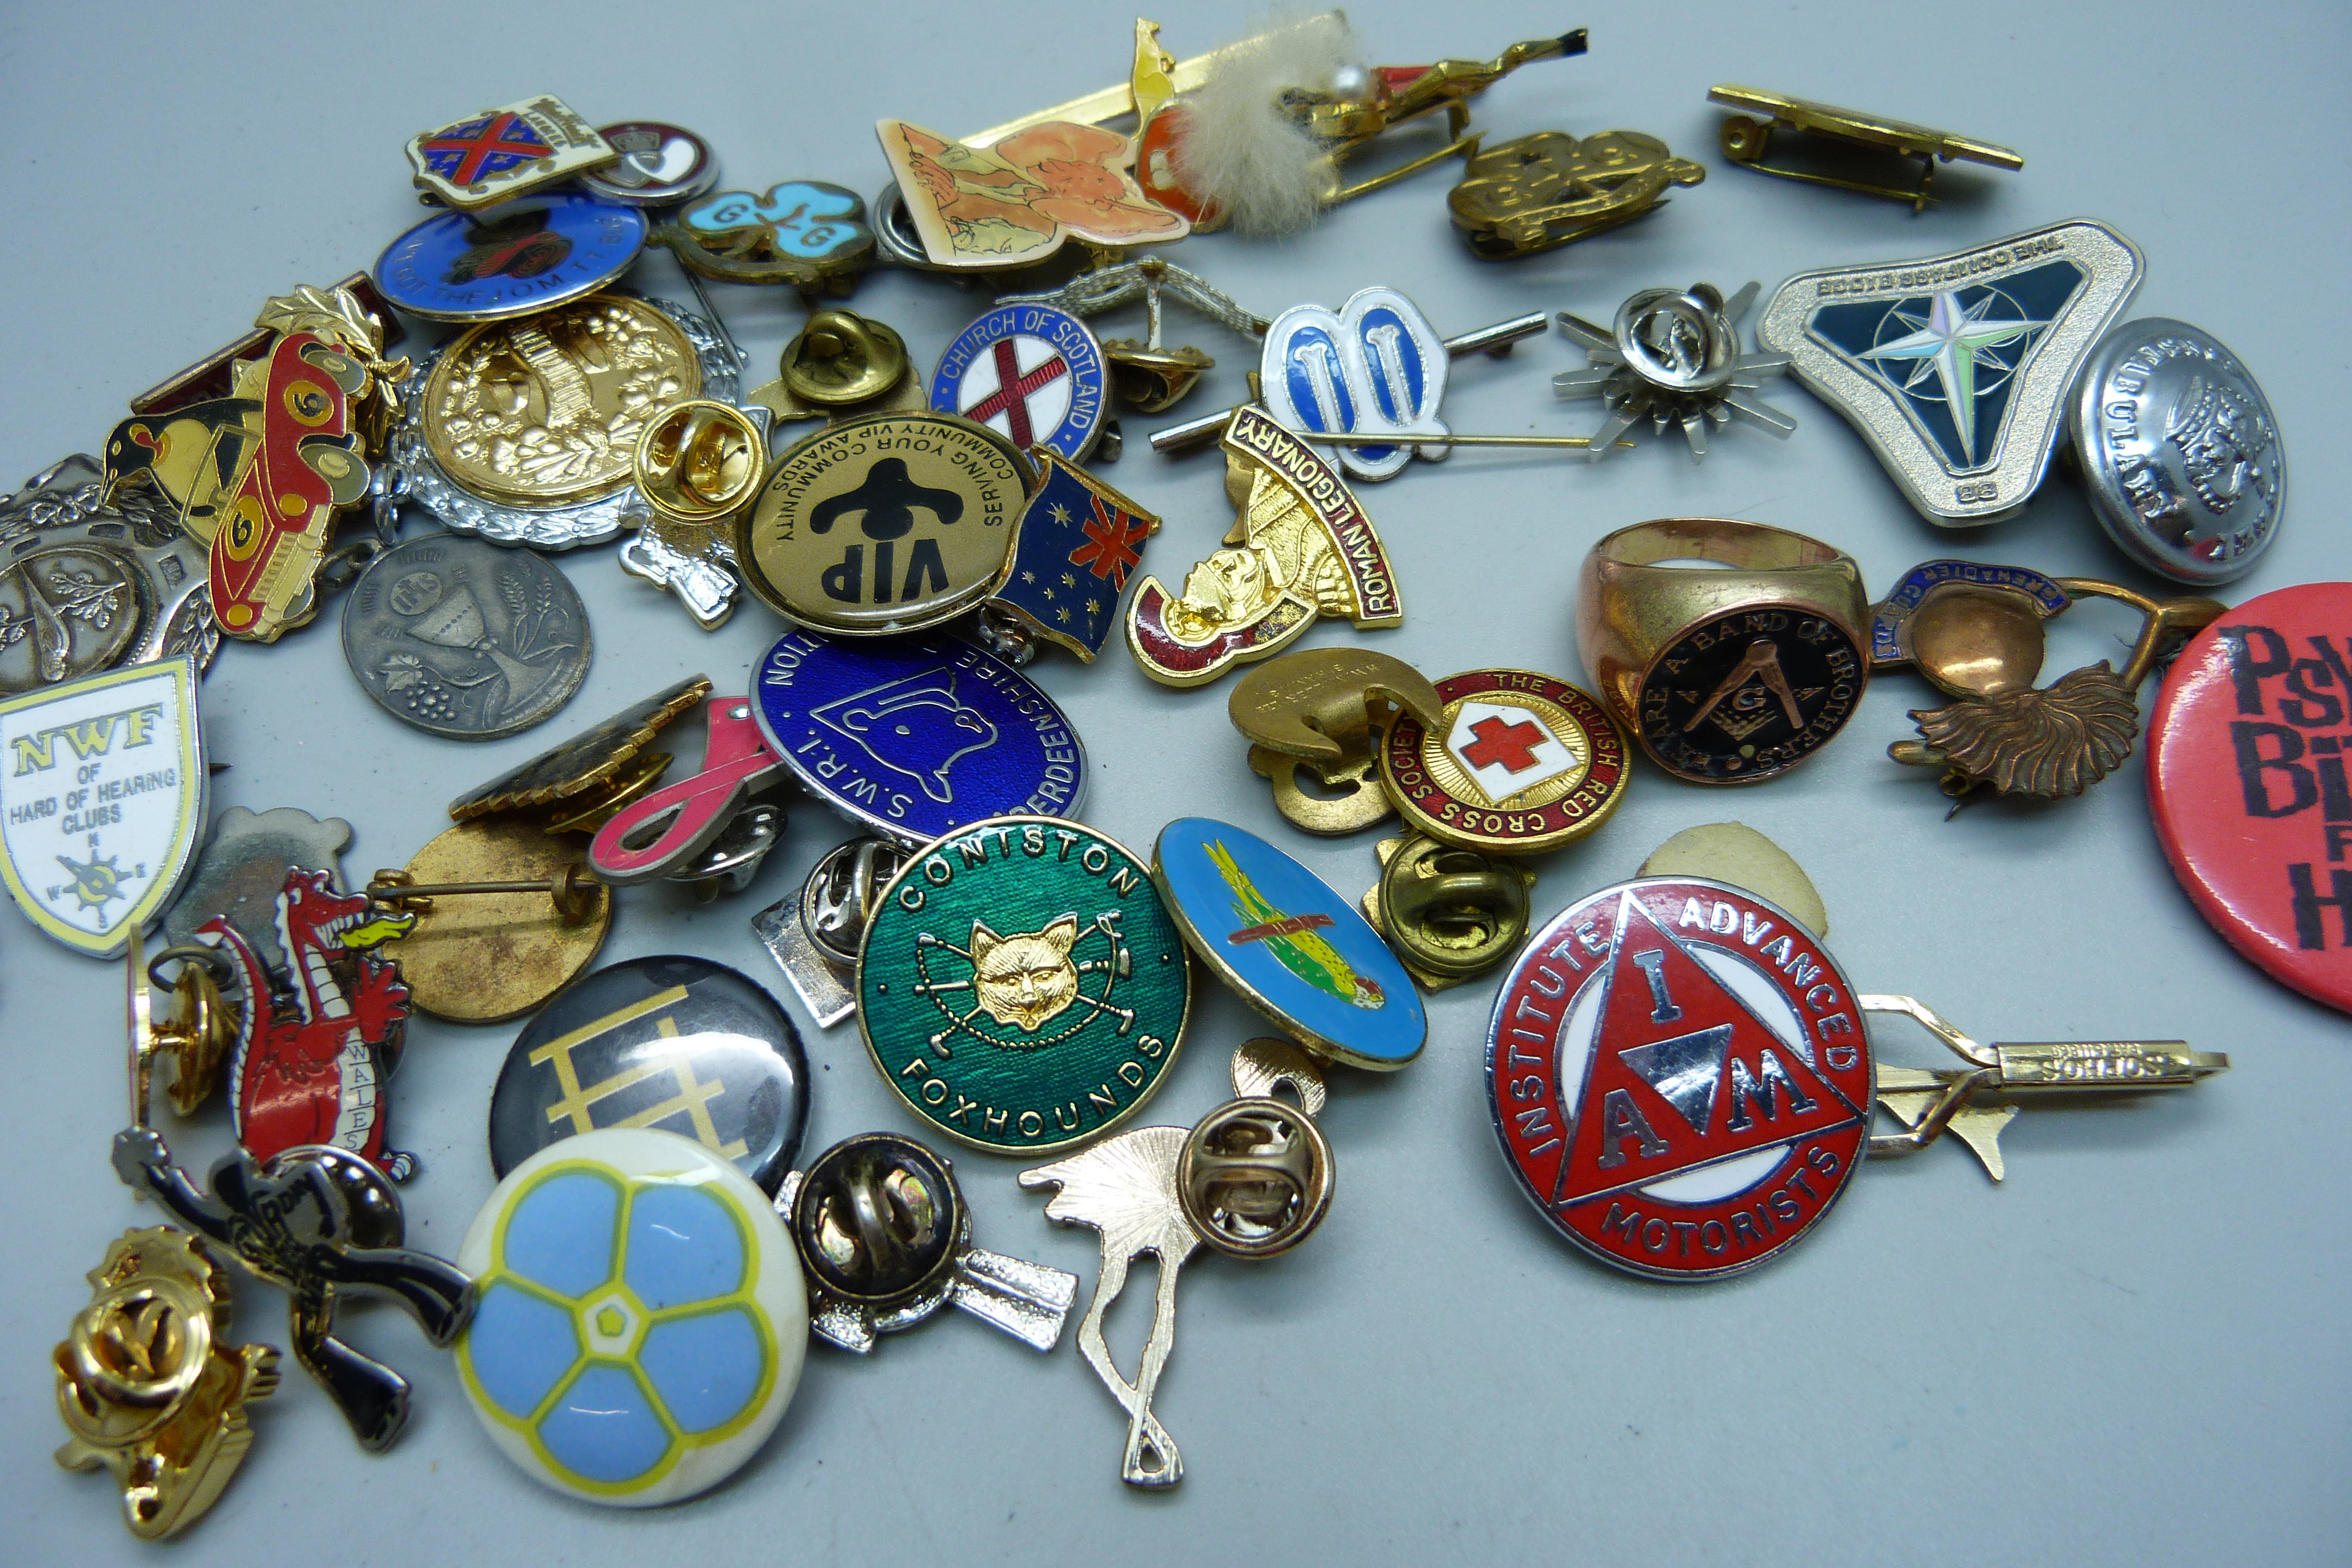 A Masonic ring and assorted badges, etc. - Image 2 of 2